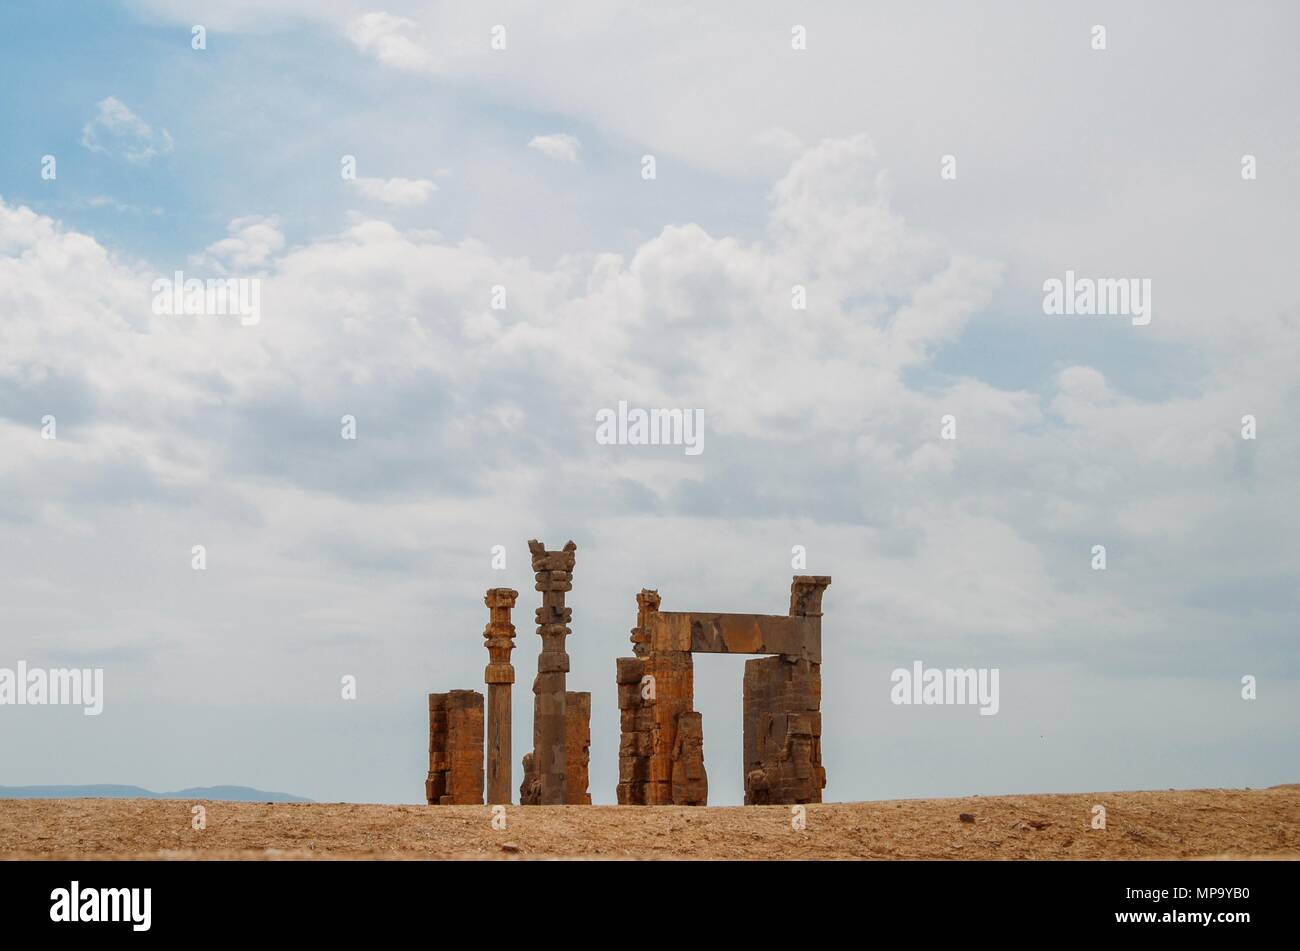 Persepolis, Iran - April 28, 2018: The ancient tombs of Achaemenid dynasty Kings of Persia are carved in rocky cliff in Naqsh-e Rustam, Iran Stock Photo